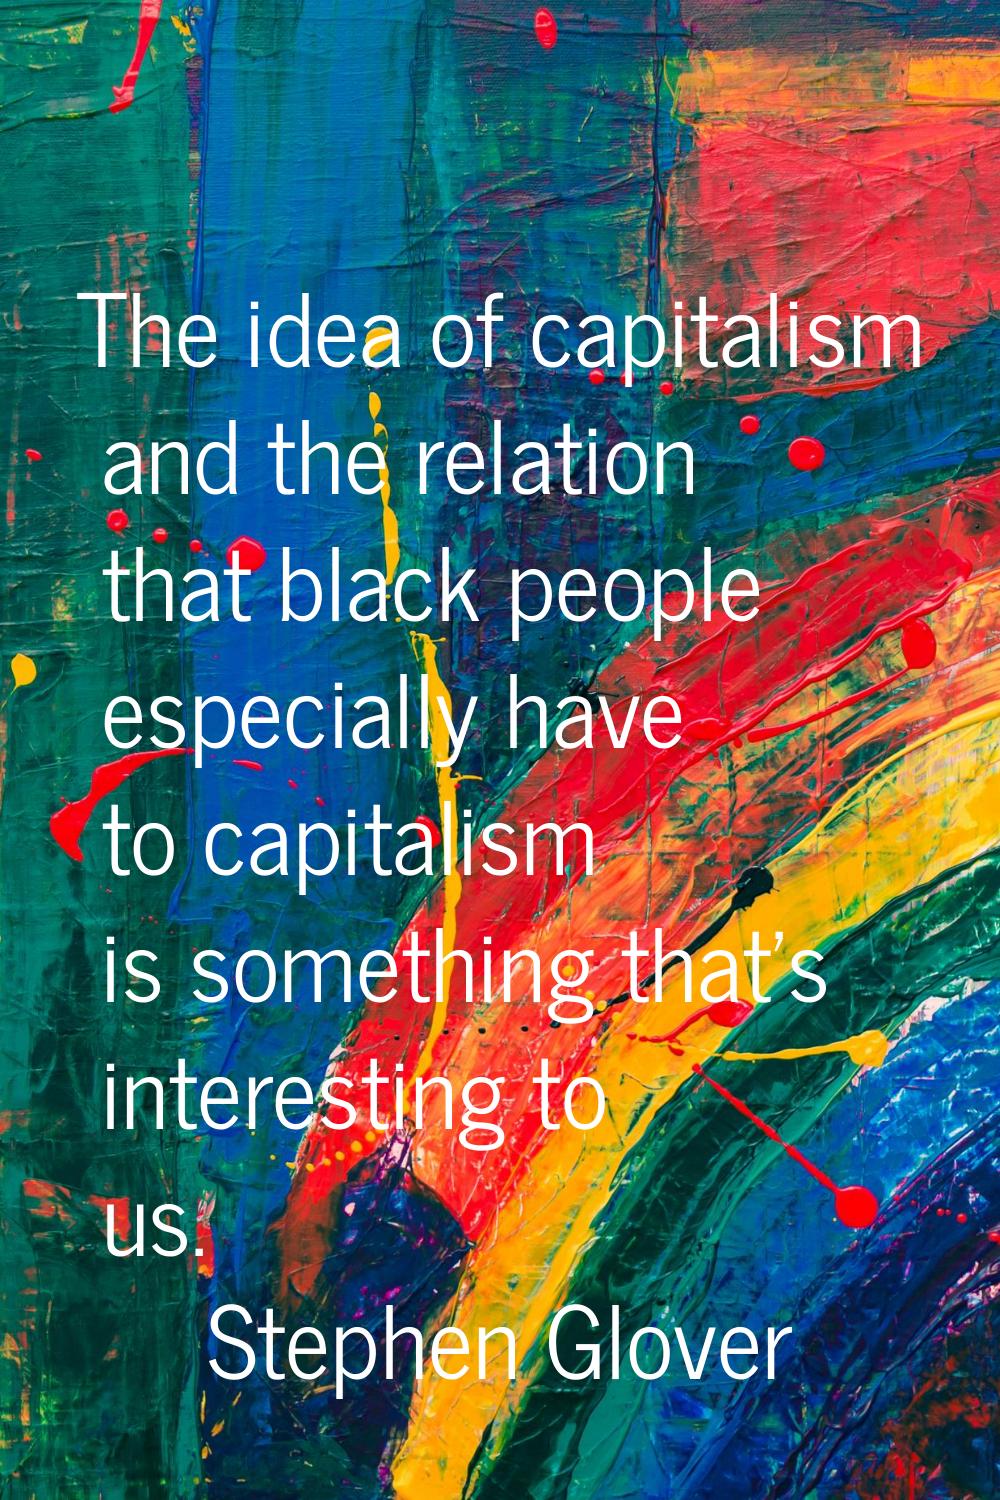 The idea of capitalism and the relation that black people especially have to capitalism is somethin